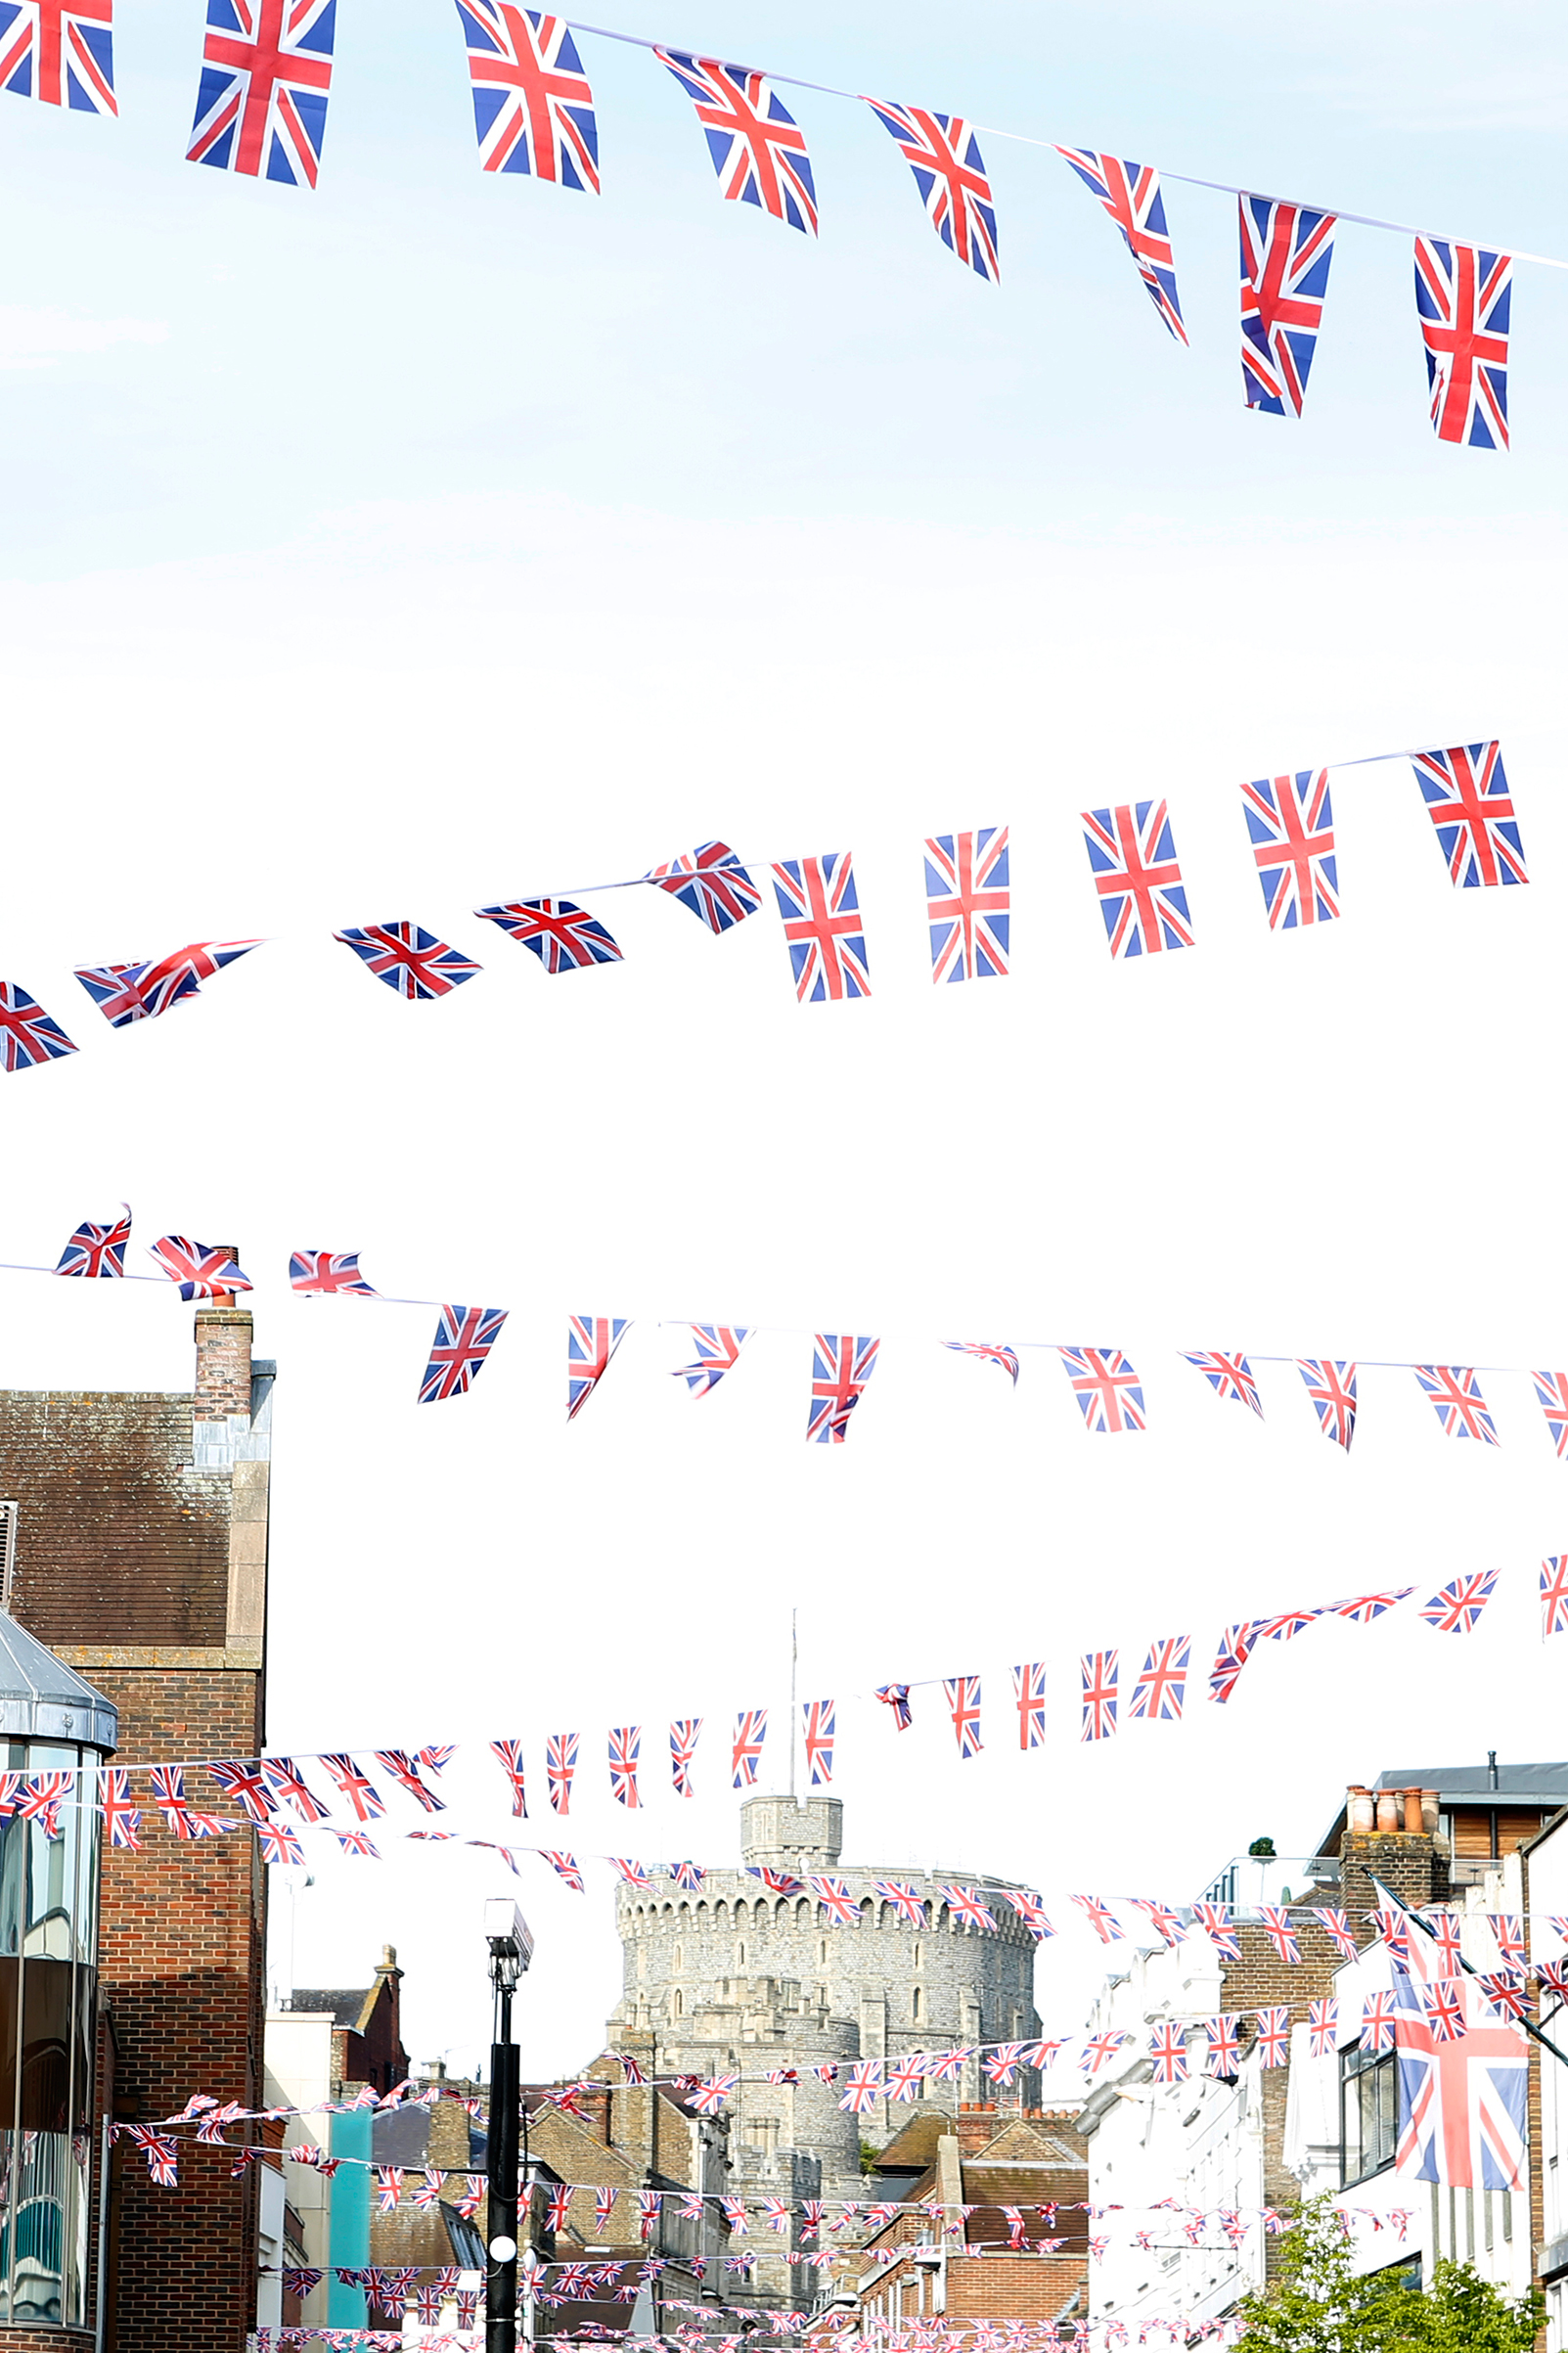 Flags criss-cross a street in Windsor, near the castle where Harry and Meghan wed. (Simon Roberts for TIME)